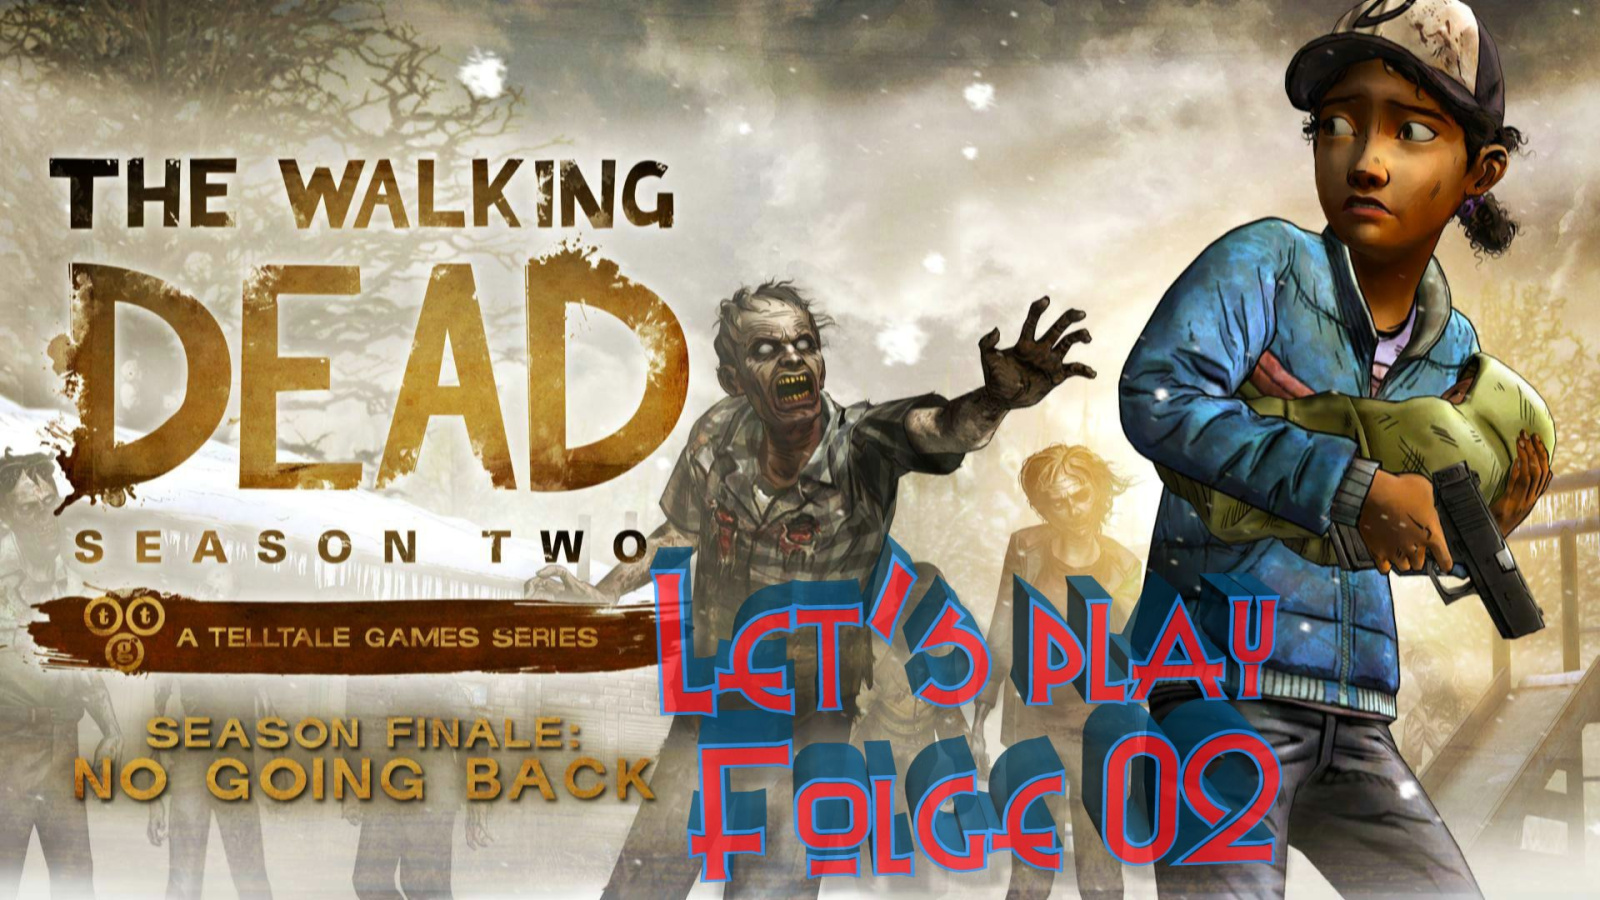 The Walking Dead: No Going Back – Let’s play 02